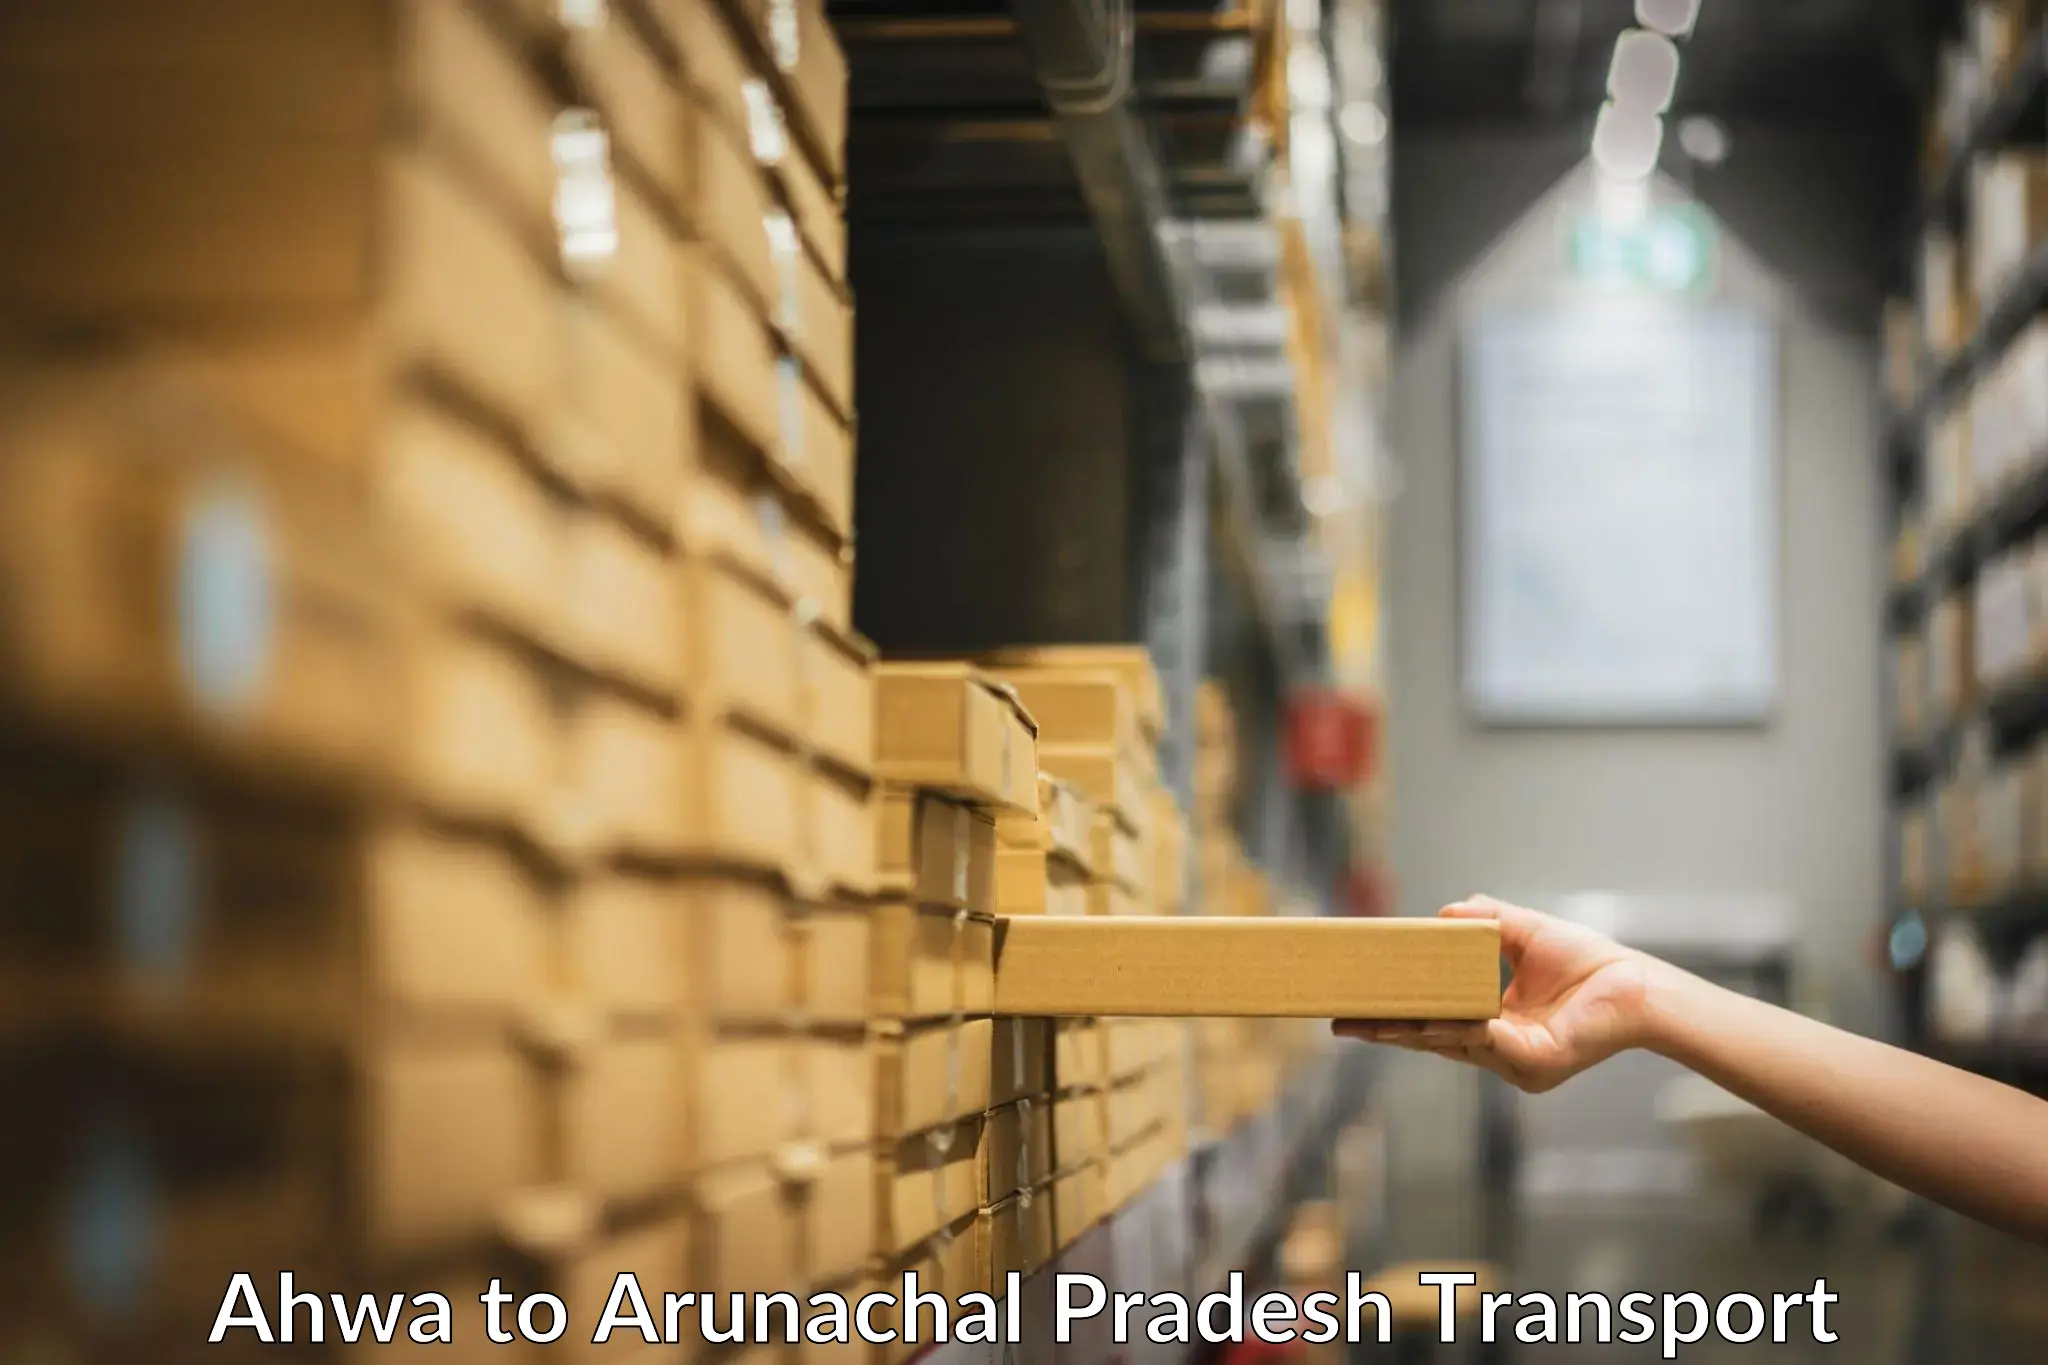 Transport bike from one state to another Ahwa to Arunachal Pradesh